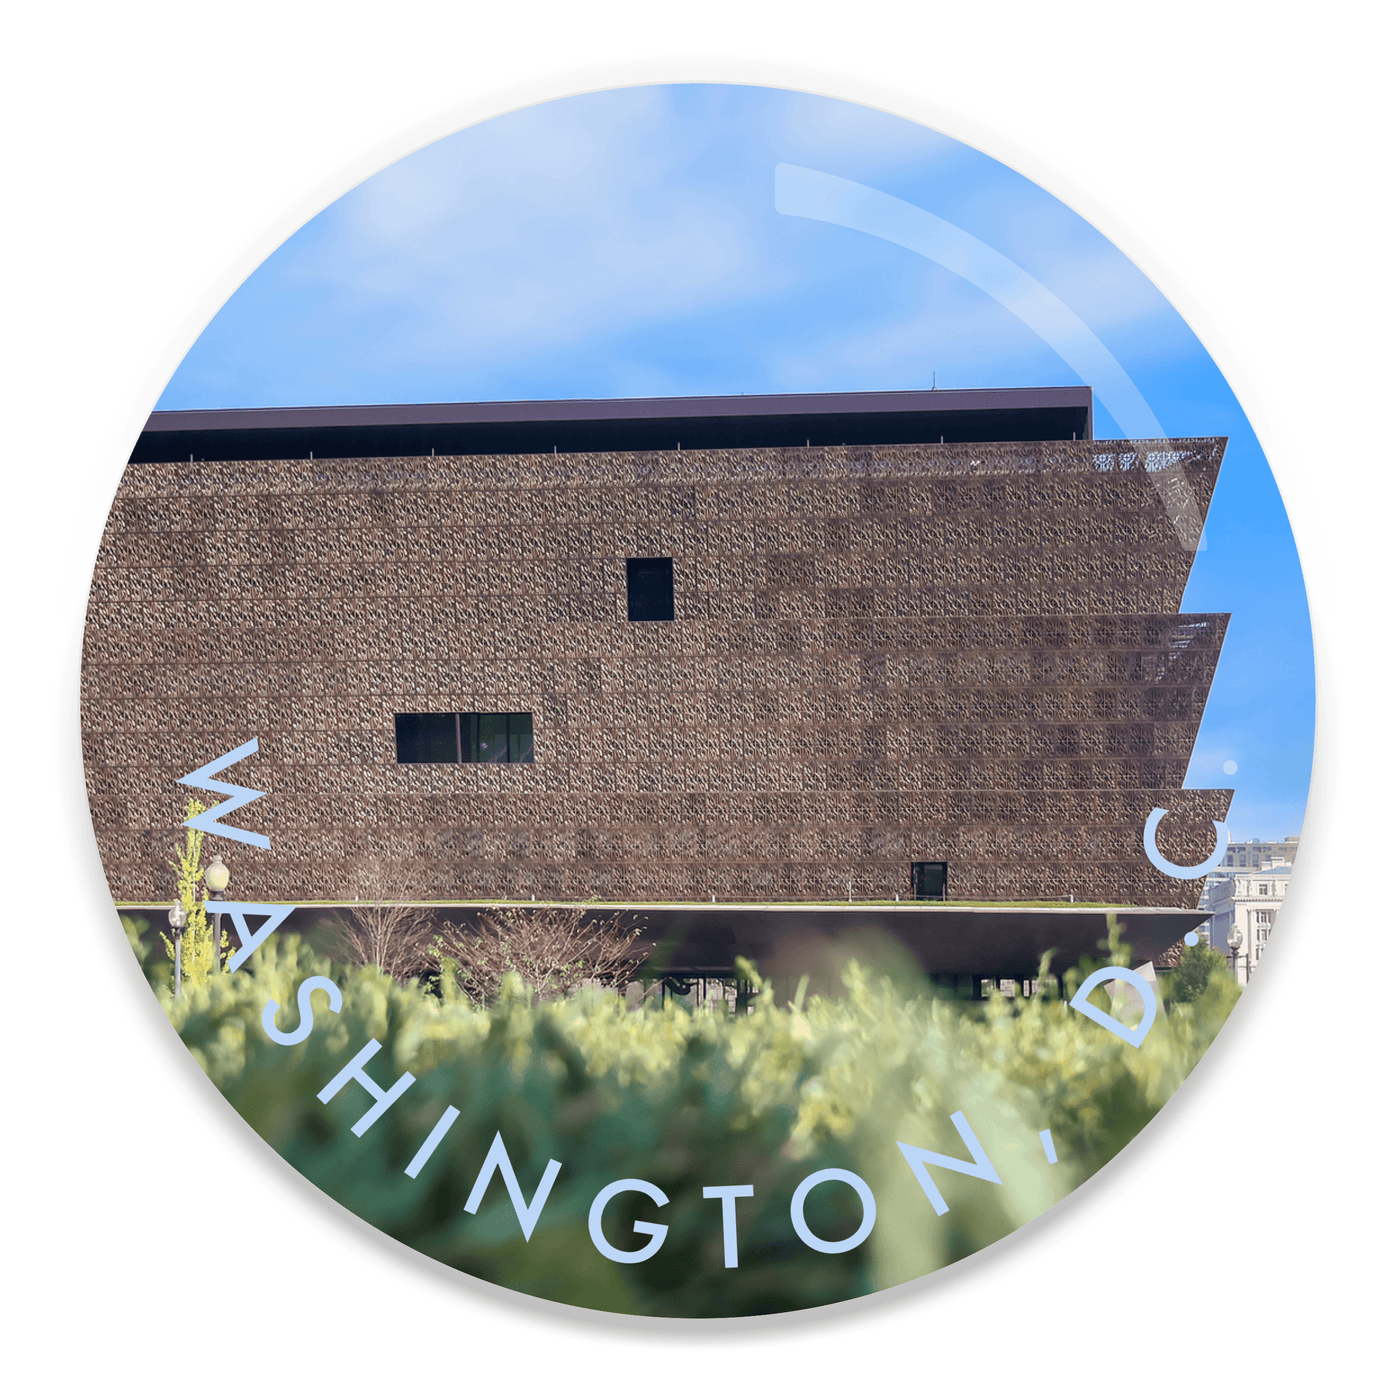 2.25 inch round colorful magnet with image of African American museum in Washington dc